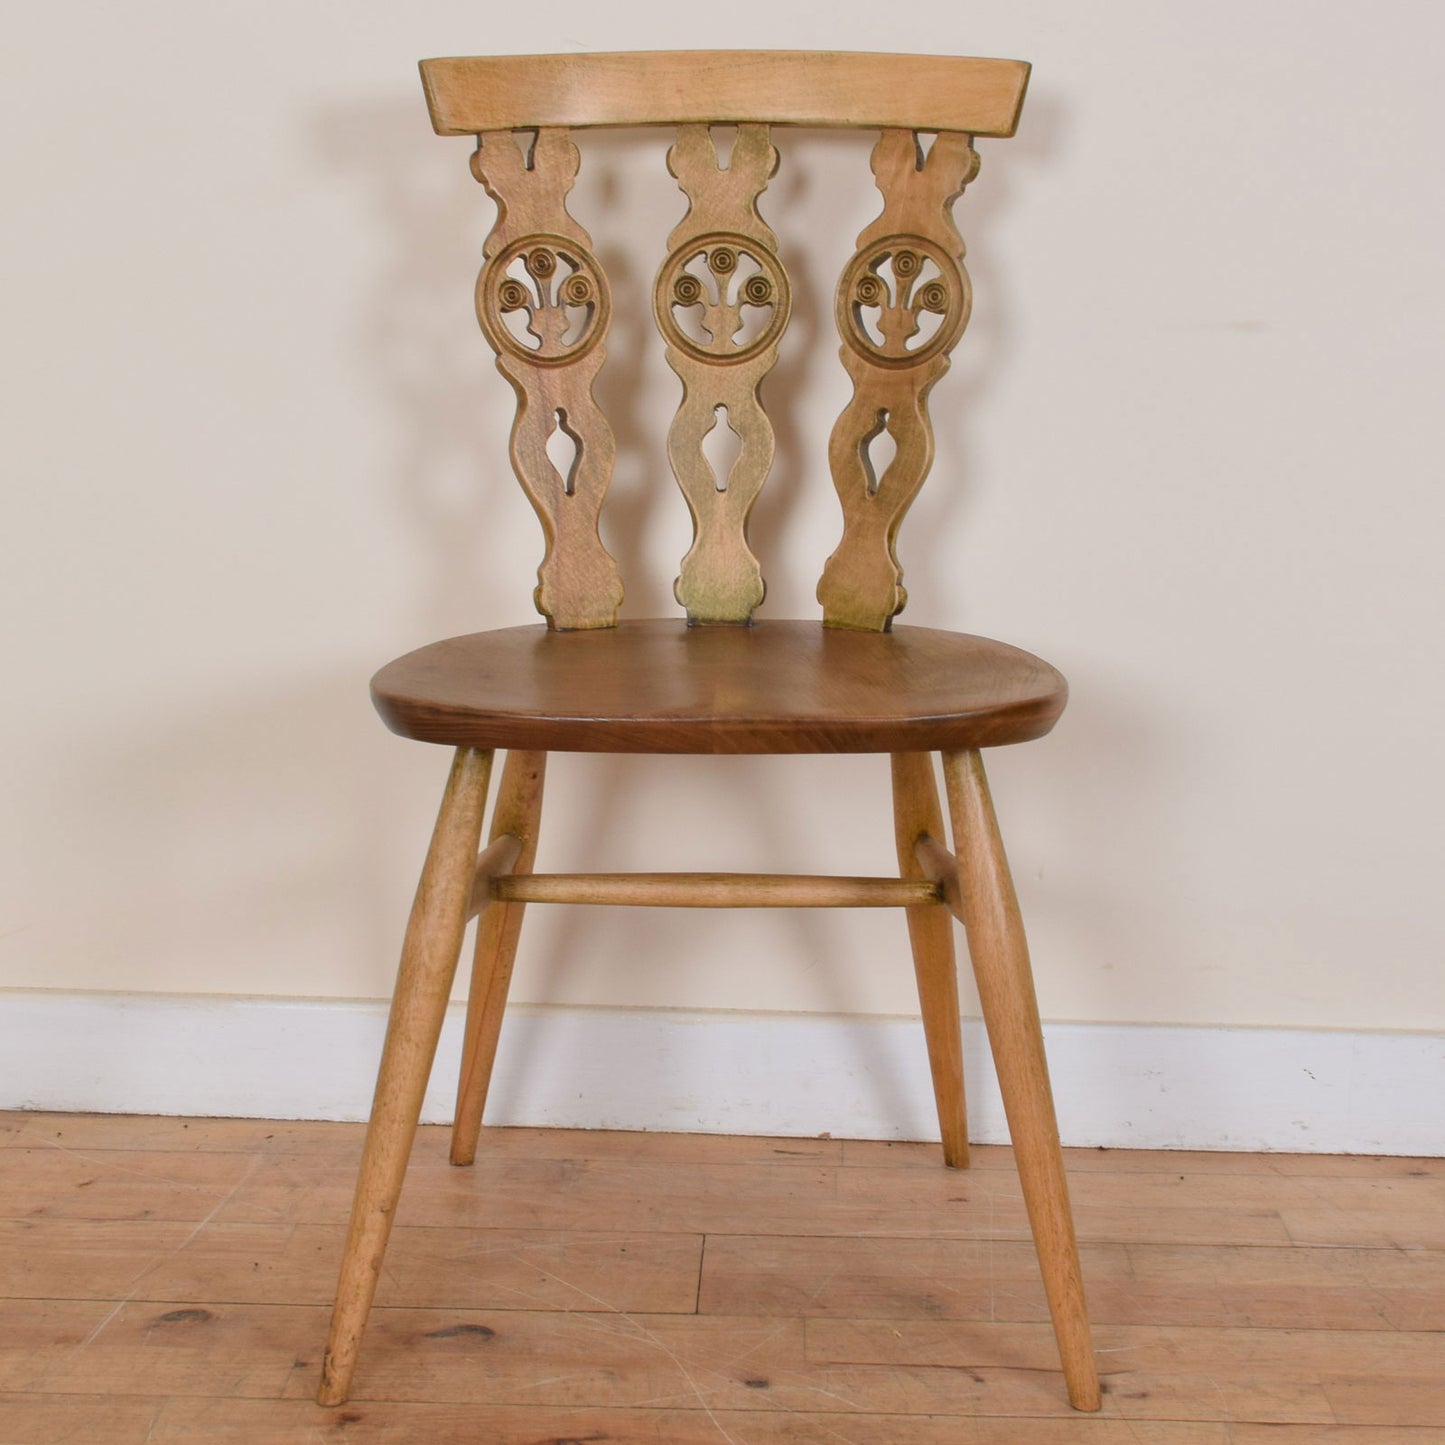 Ercol Table and Four Chairs